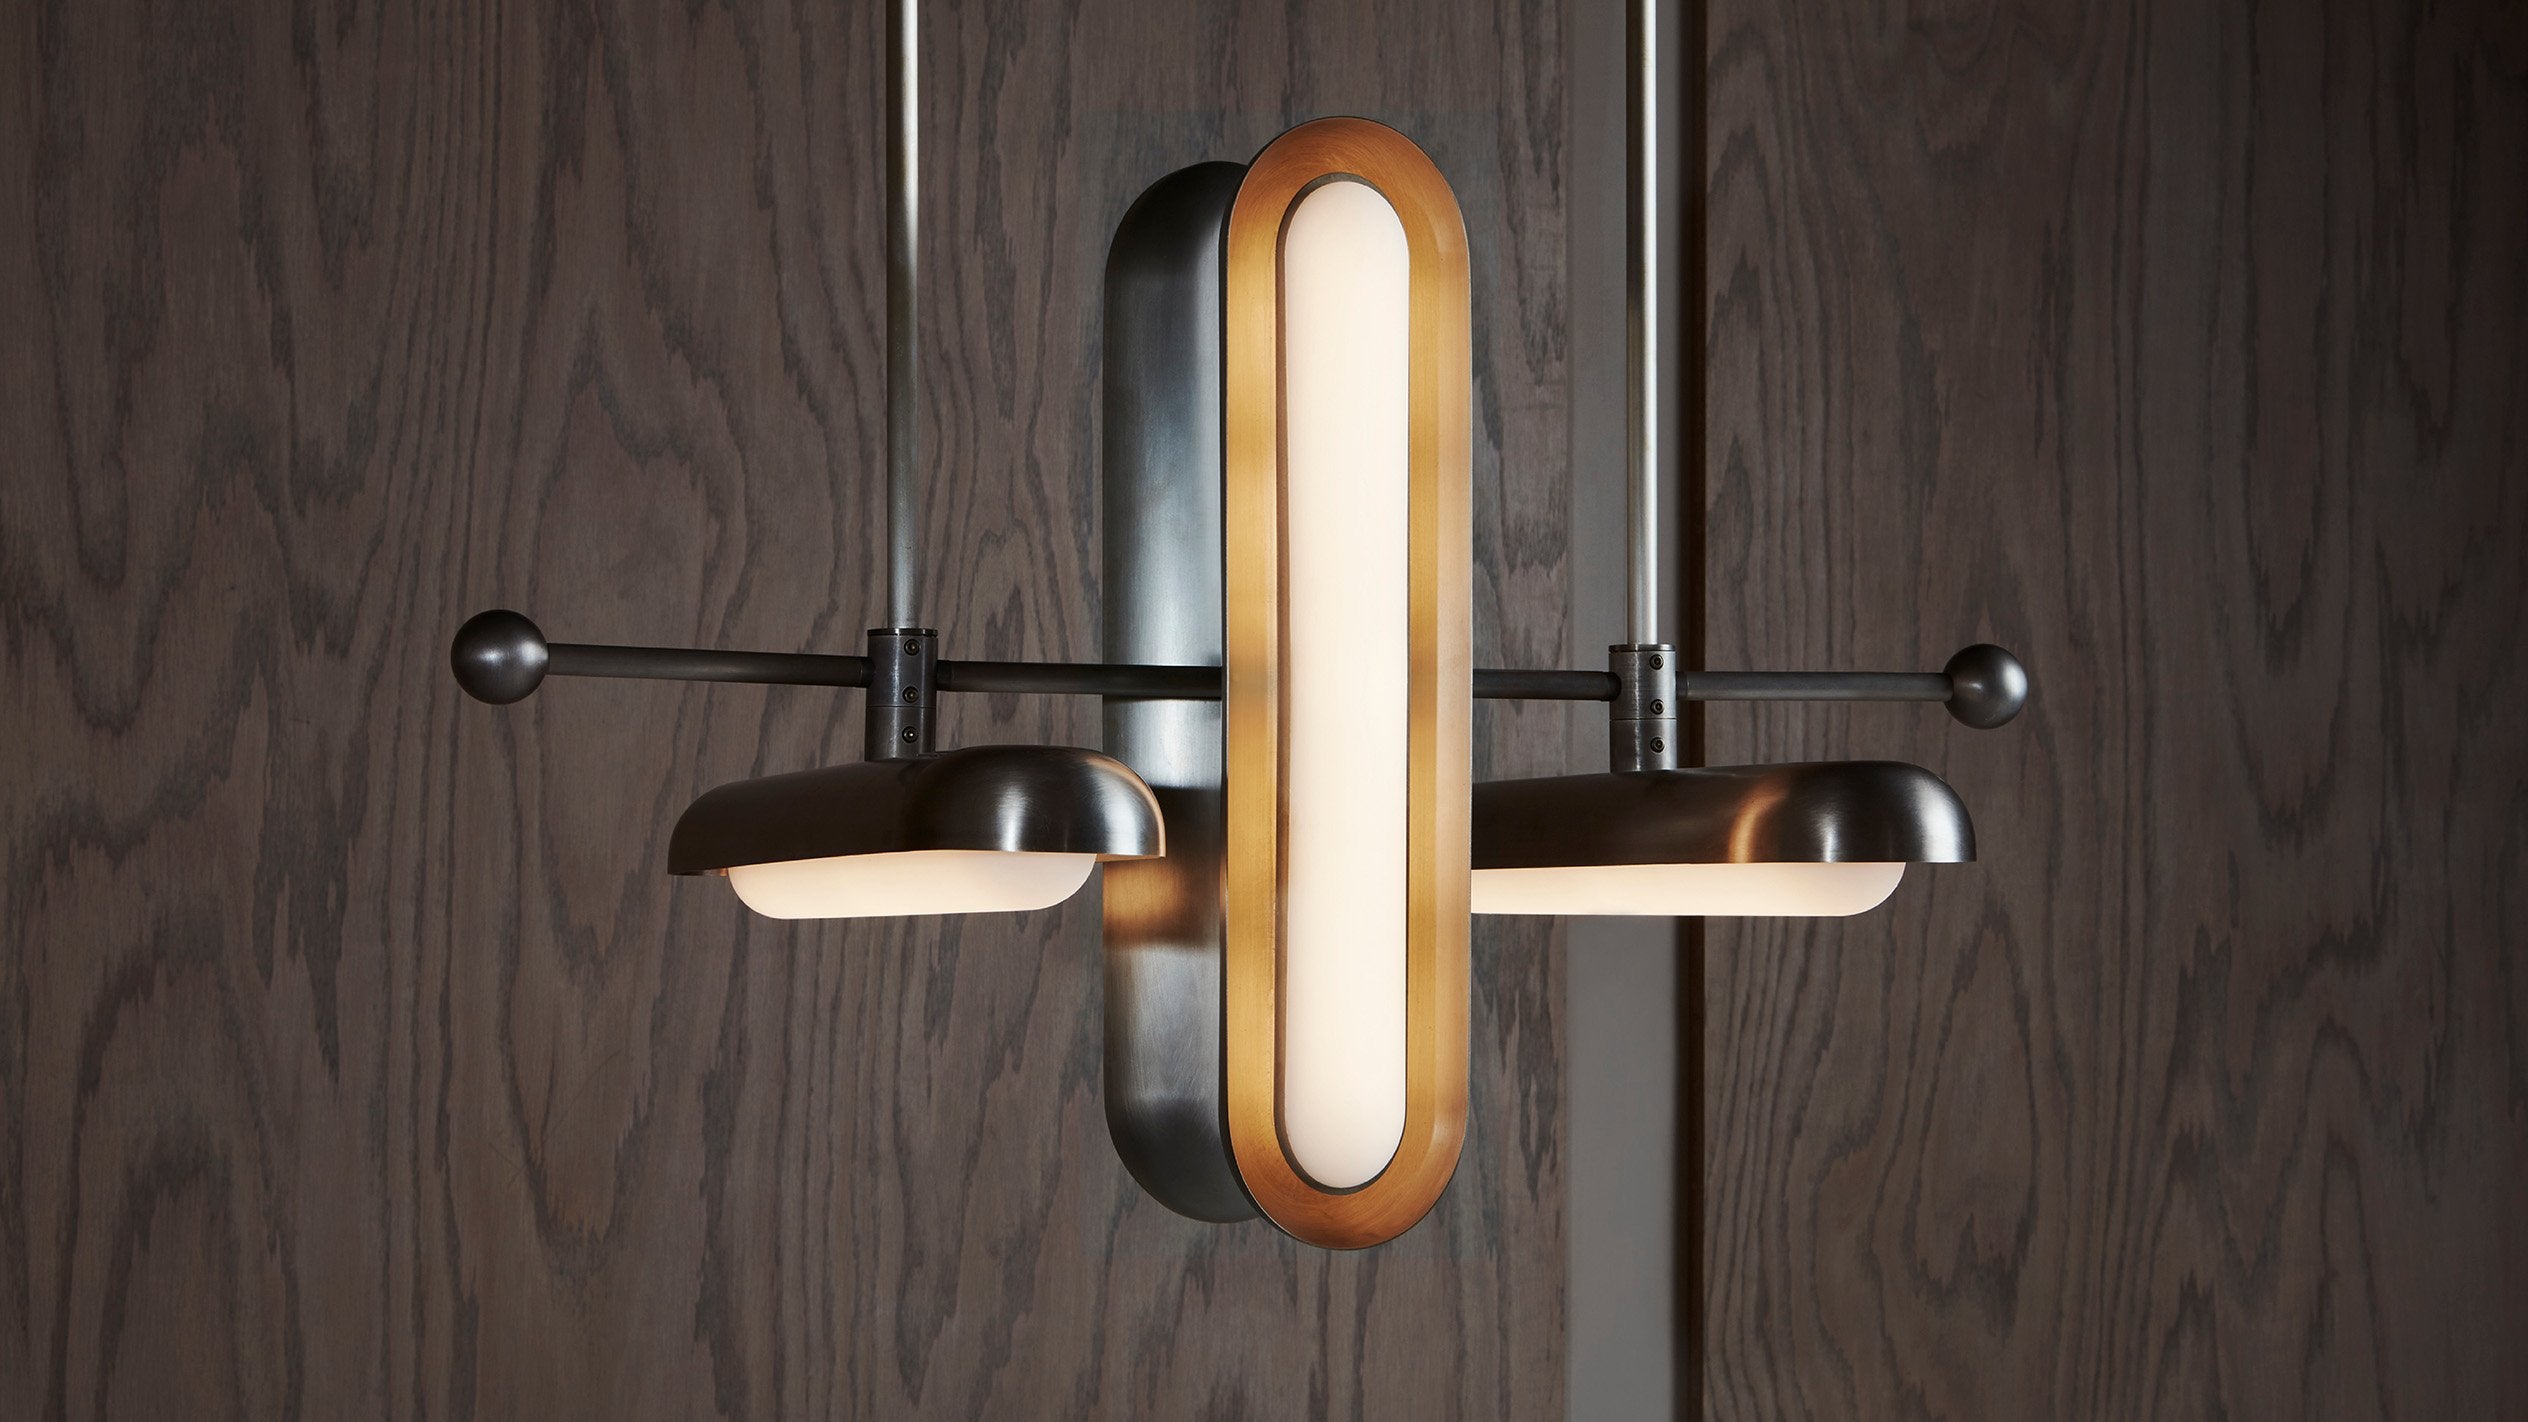 CIRCUIT : 4 alternating ceiling pendant in two-tone Tarnished Silver / Aged Brass finish.